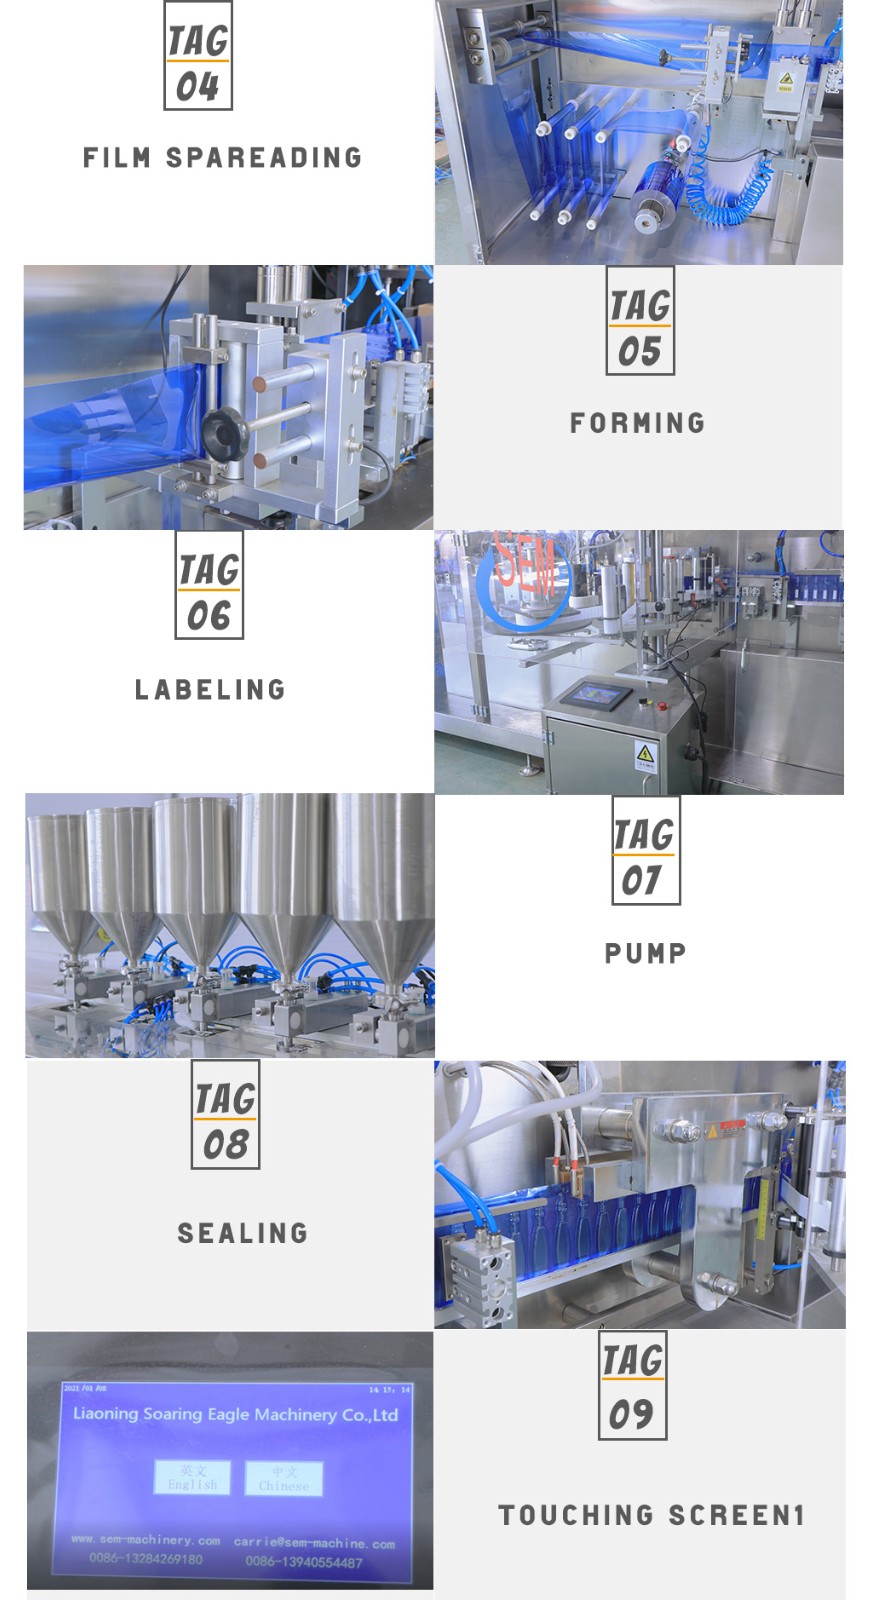 Olive oil filling plastic vial ampoule filling and sealing machine